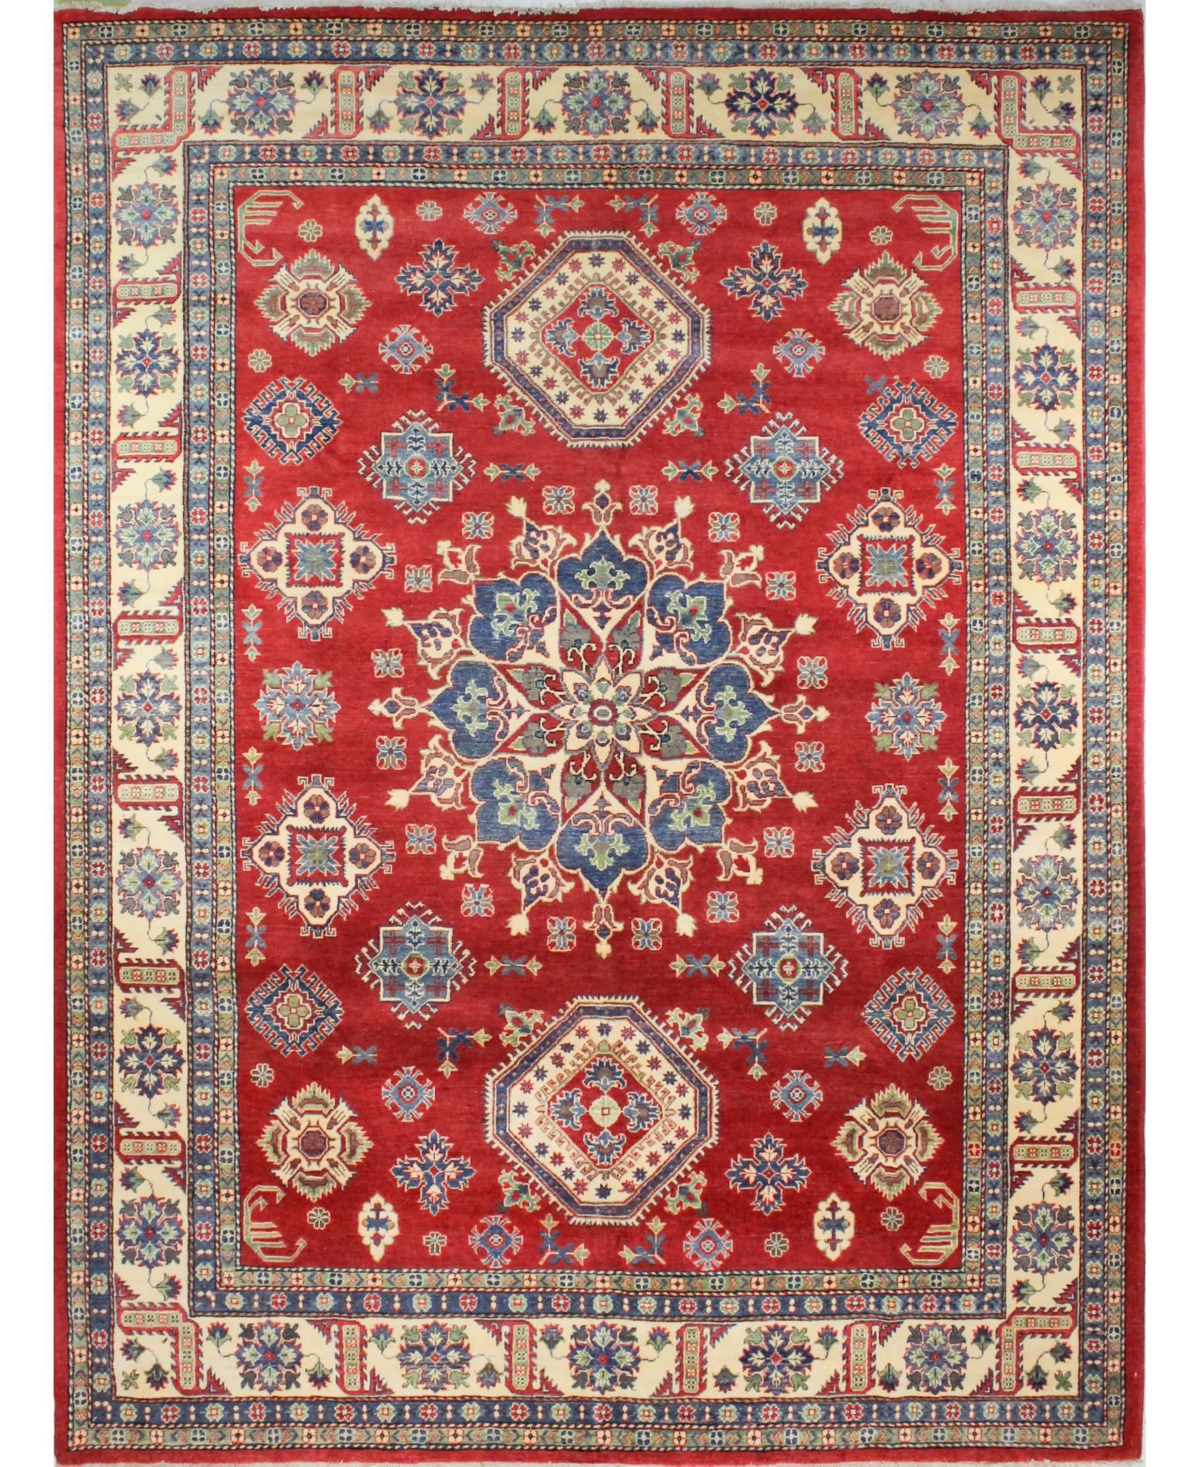 Bb Rugs One of a Kind Pak Kazak 9'2in x 12' Area Rug - Red